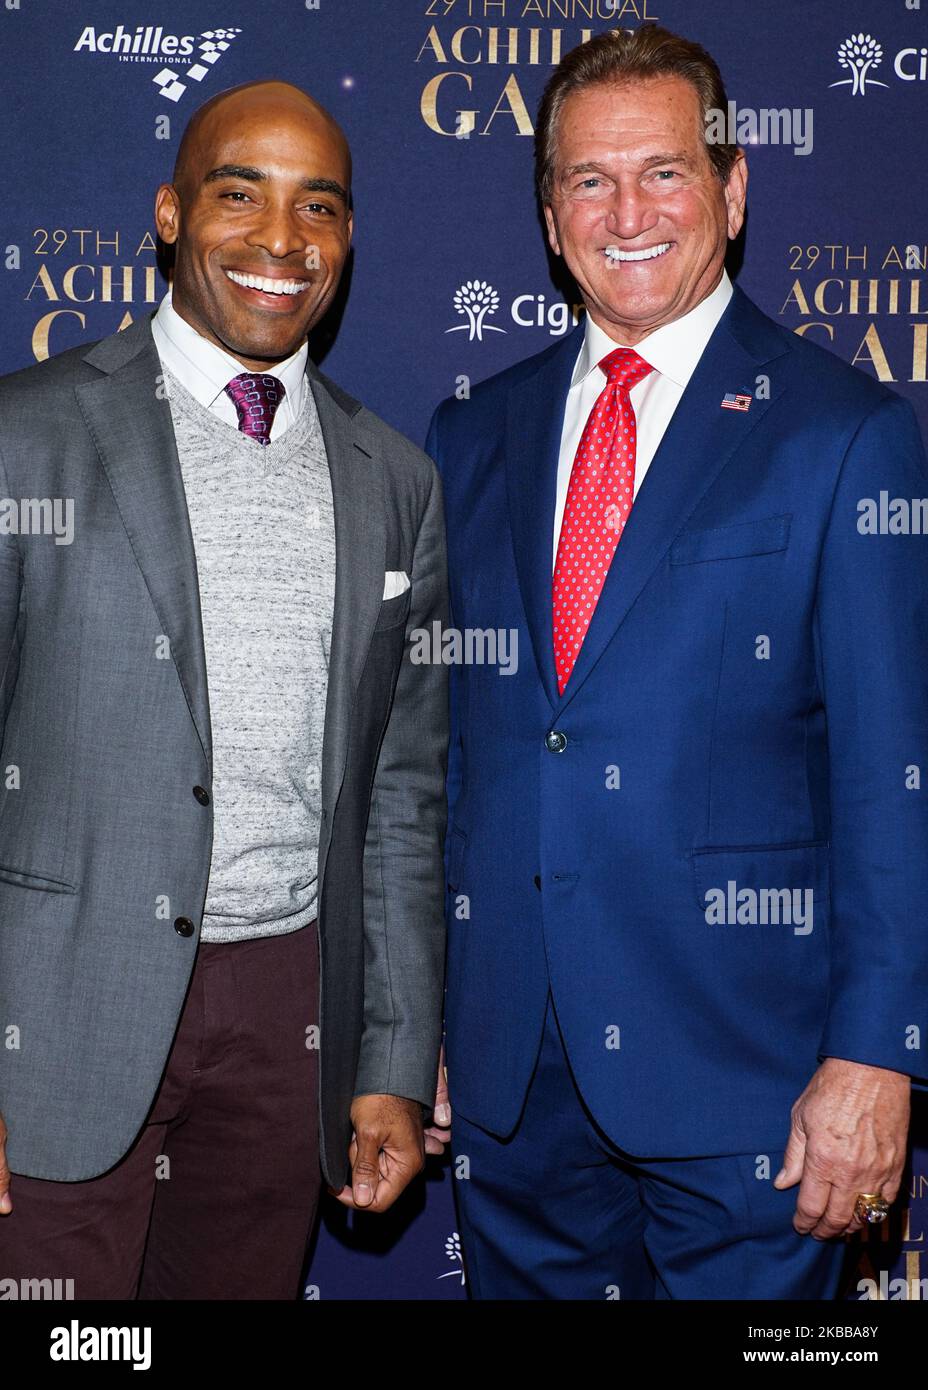 L-R) Former NFL players Joe Theismann and former NBA player Magic Johnson  attend The 29th Annual Achilles Gala at Cipriani South, New York, NY,  November 20, 2019. (Photo by Anthony Behar/Sipa USA